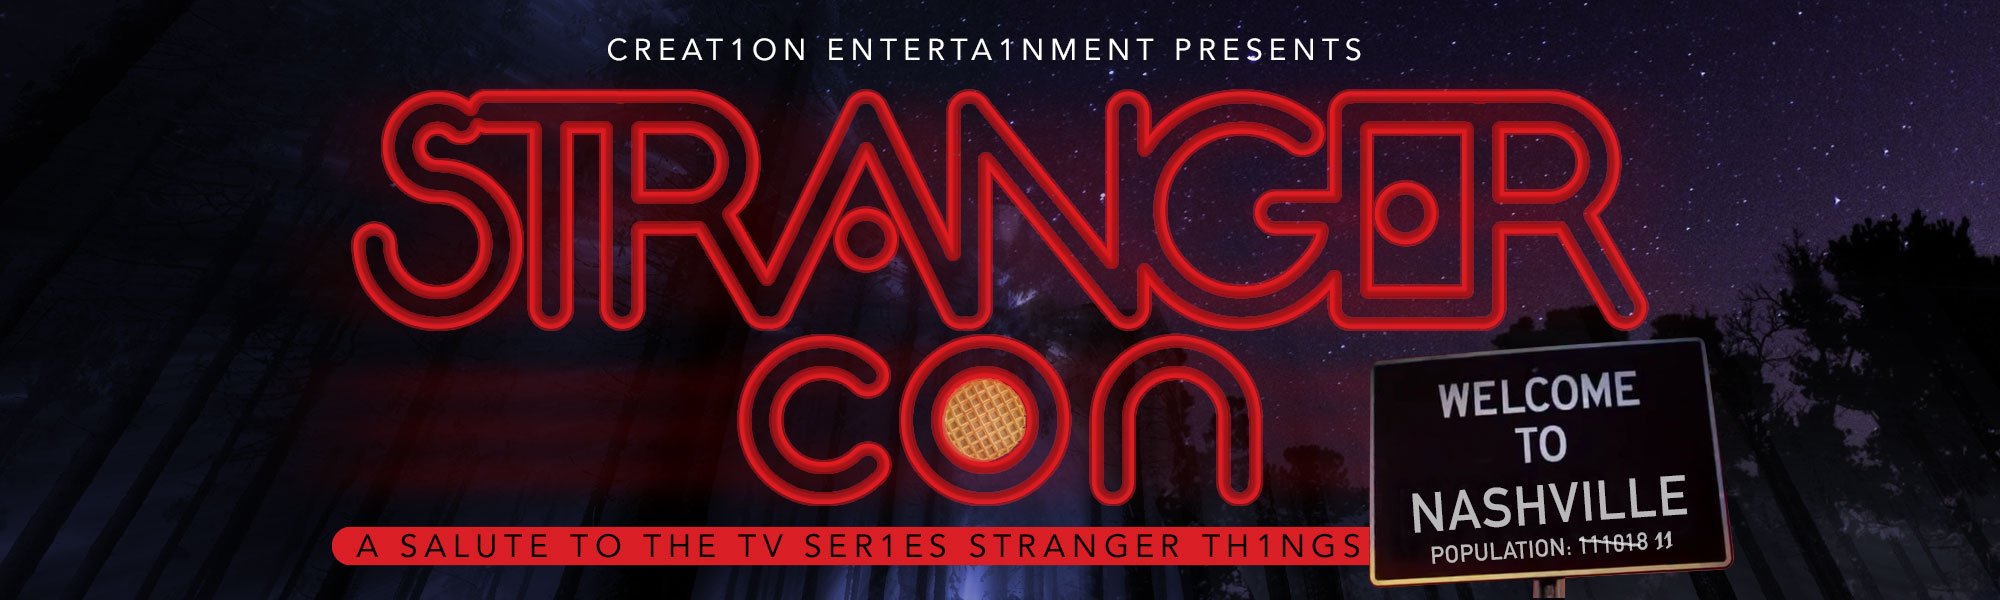 Creation Entertainment presents STRANGER CON a salute to the TV series